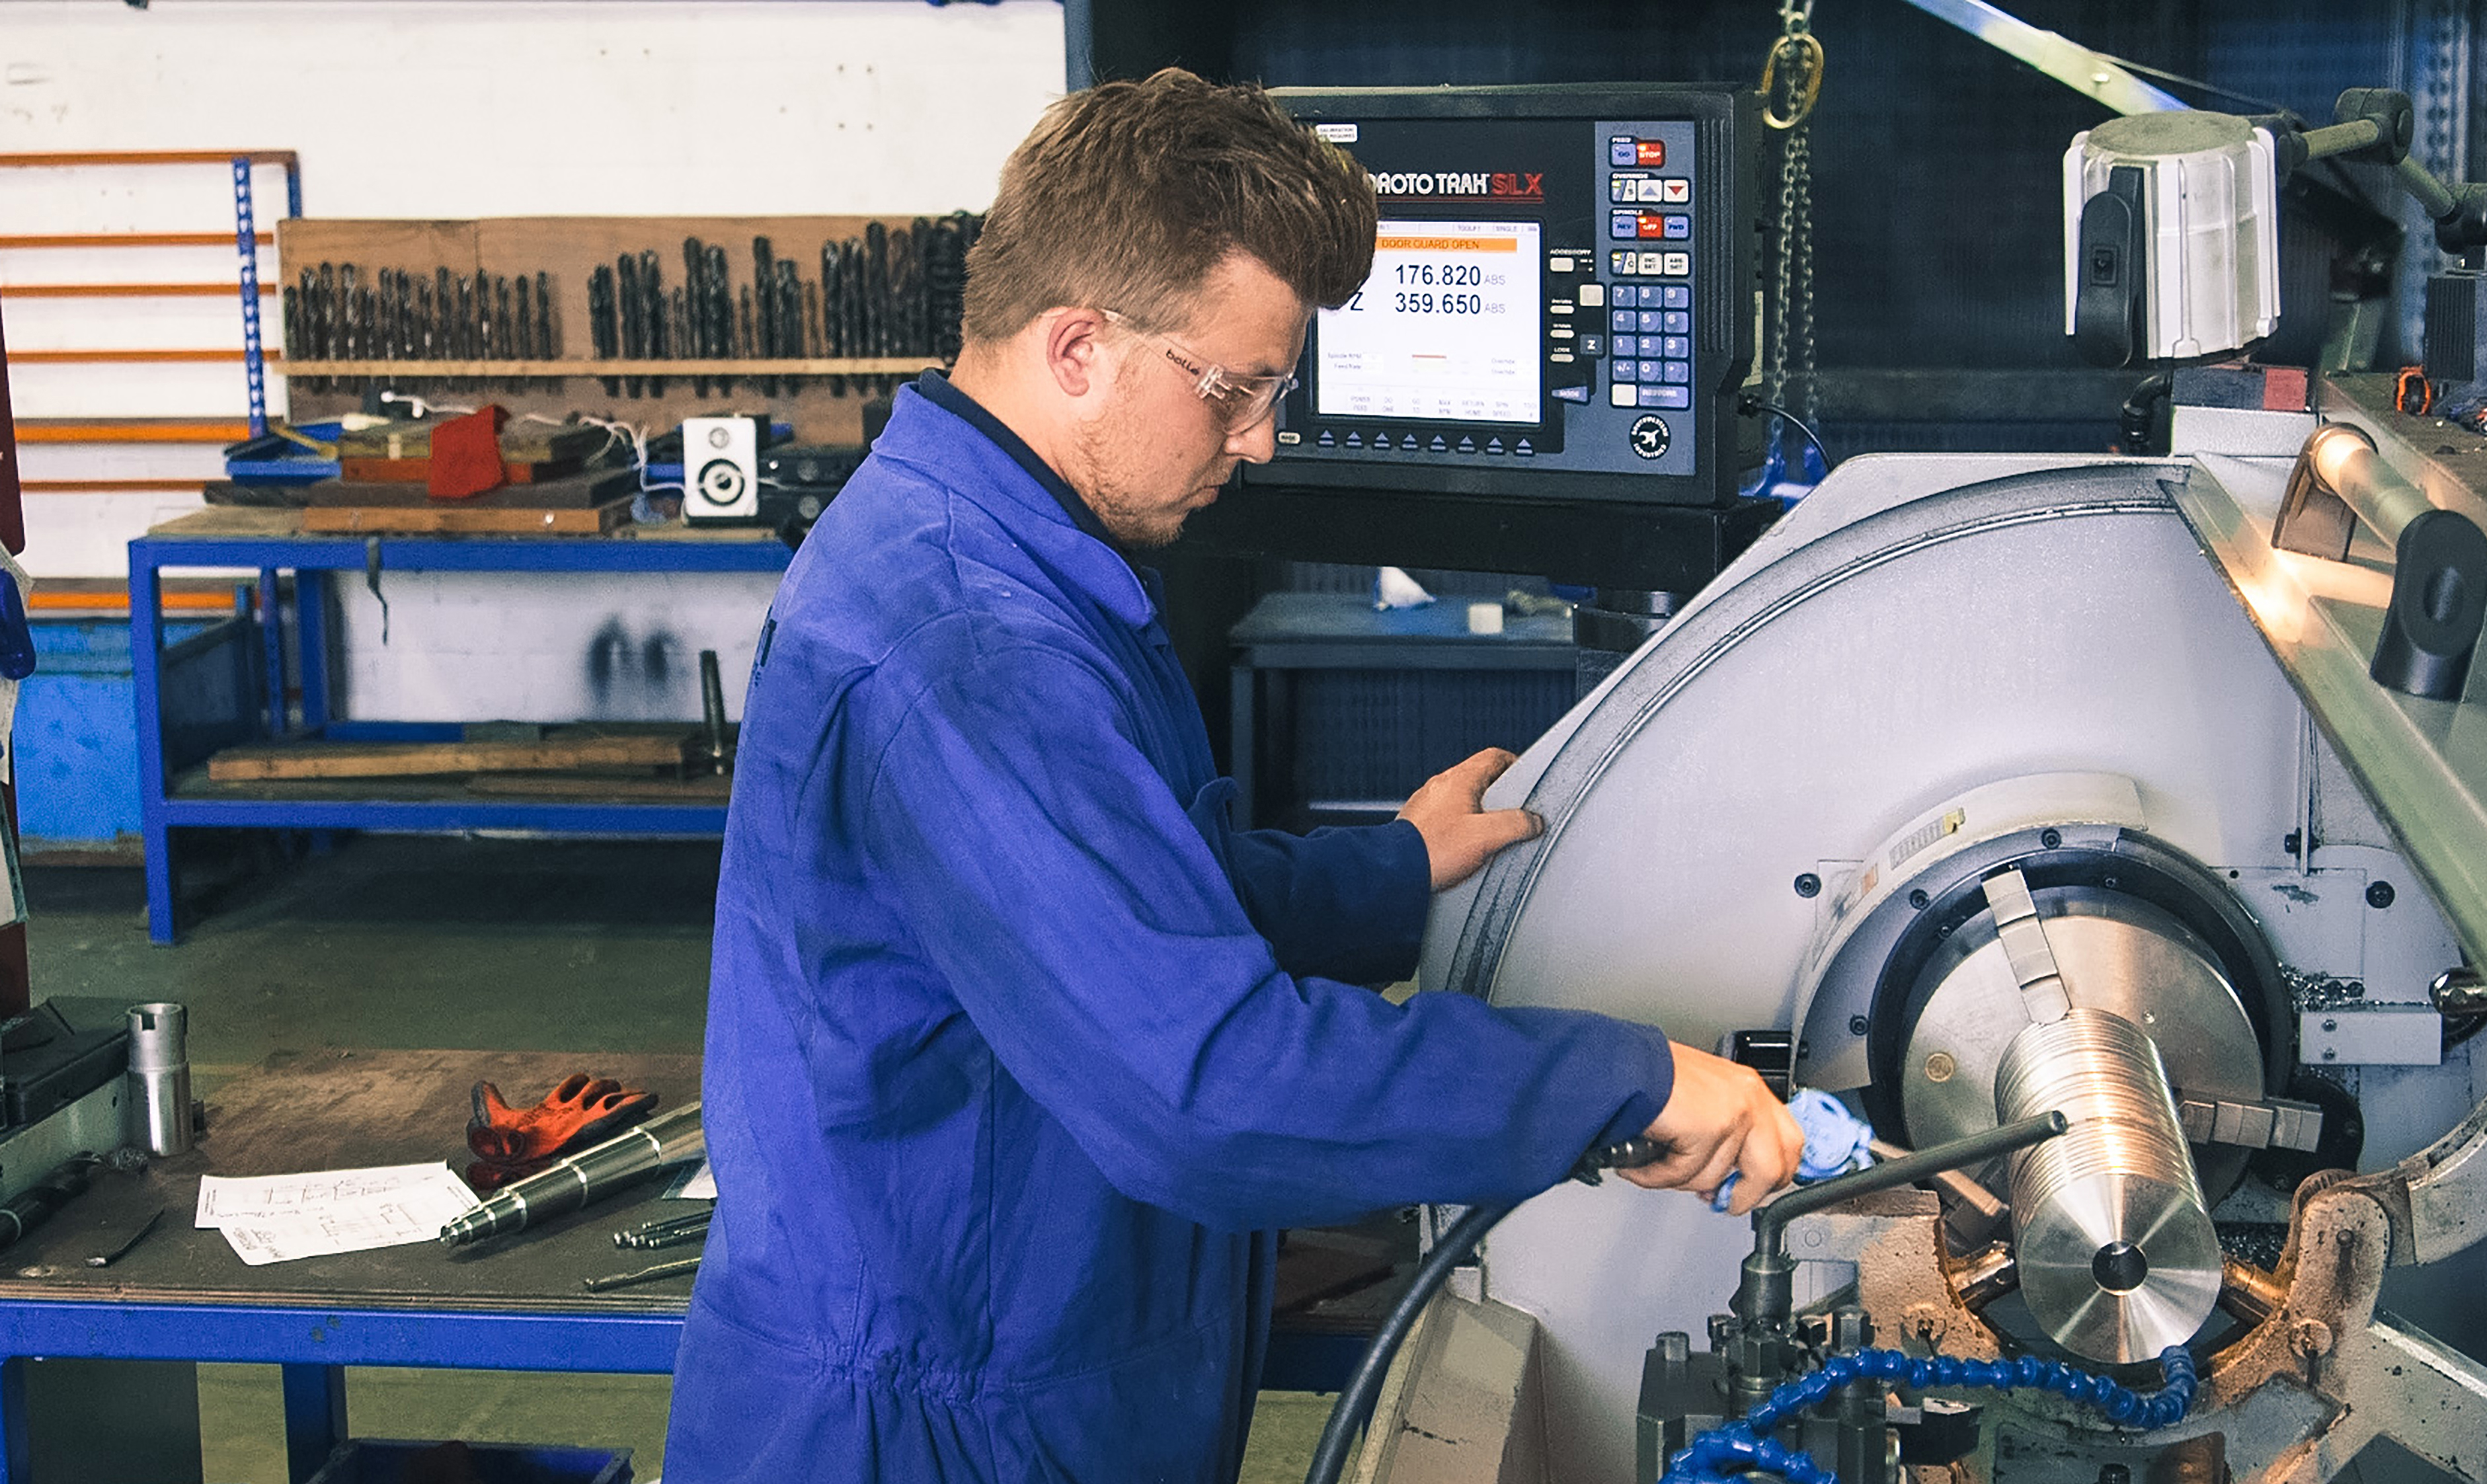 Rotamec’s round-the-clock maintenance services are performed by qualified and experienced engineers.